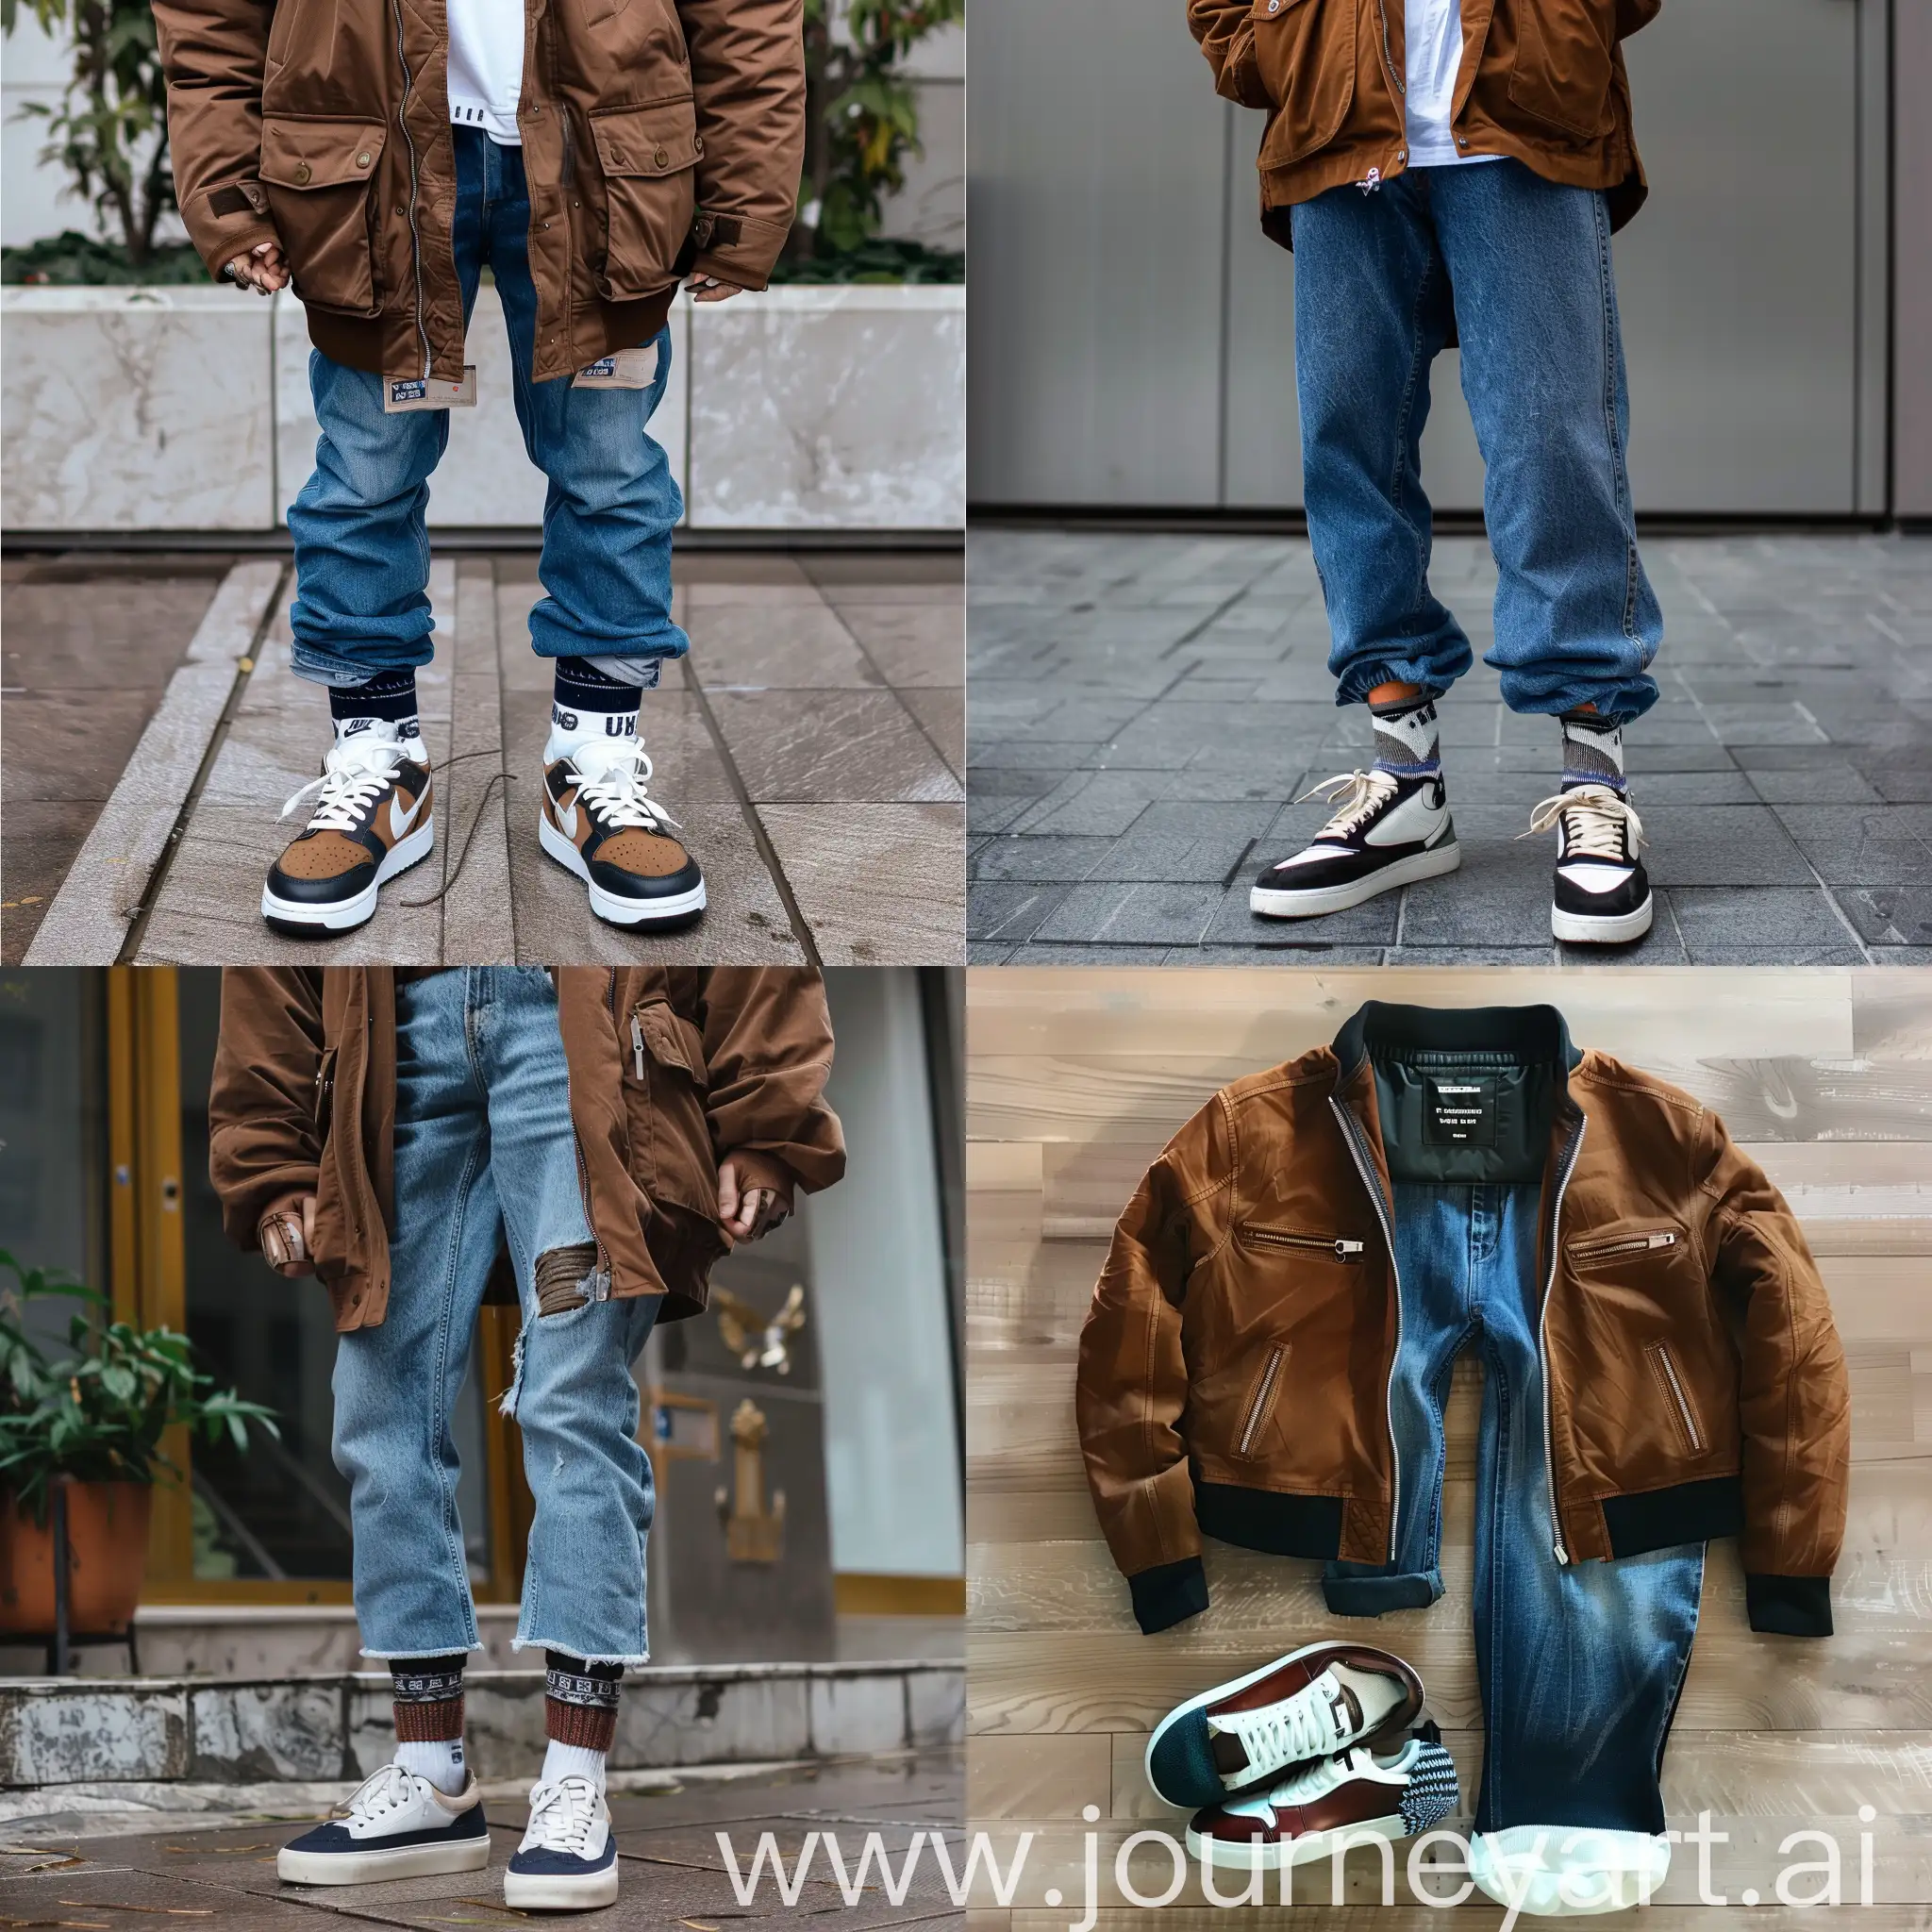 outlook style with brown jacket, blue jeans, white and black shoes and uzbekistan socks